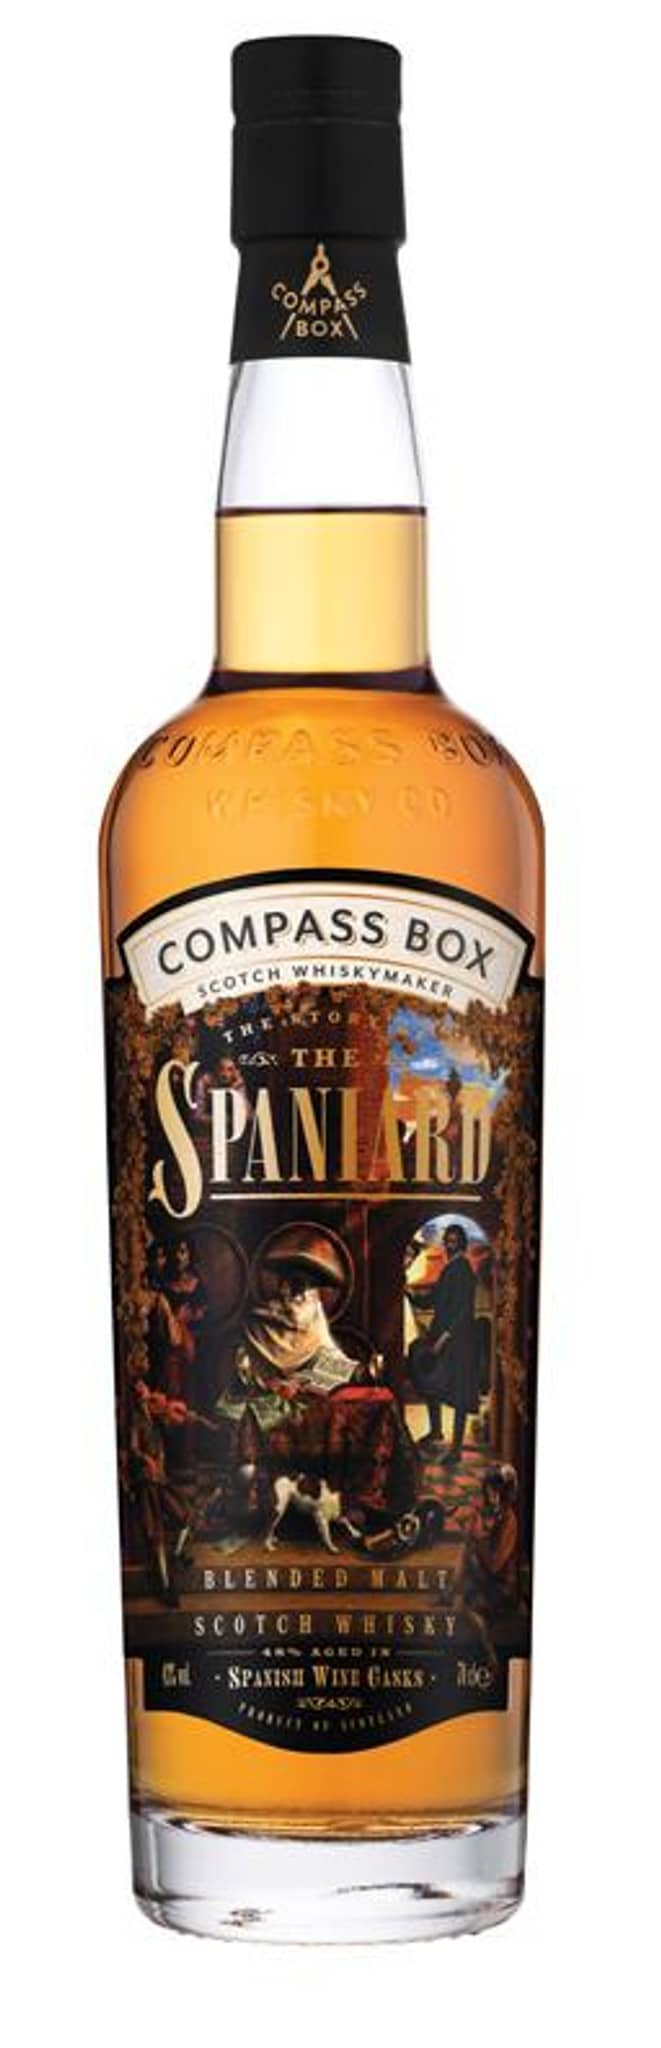 Compass Box “The Story of the Spaniard” Blended Malt Scotch Whiskey